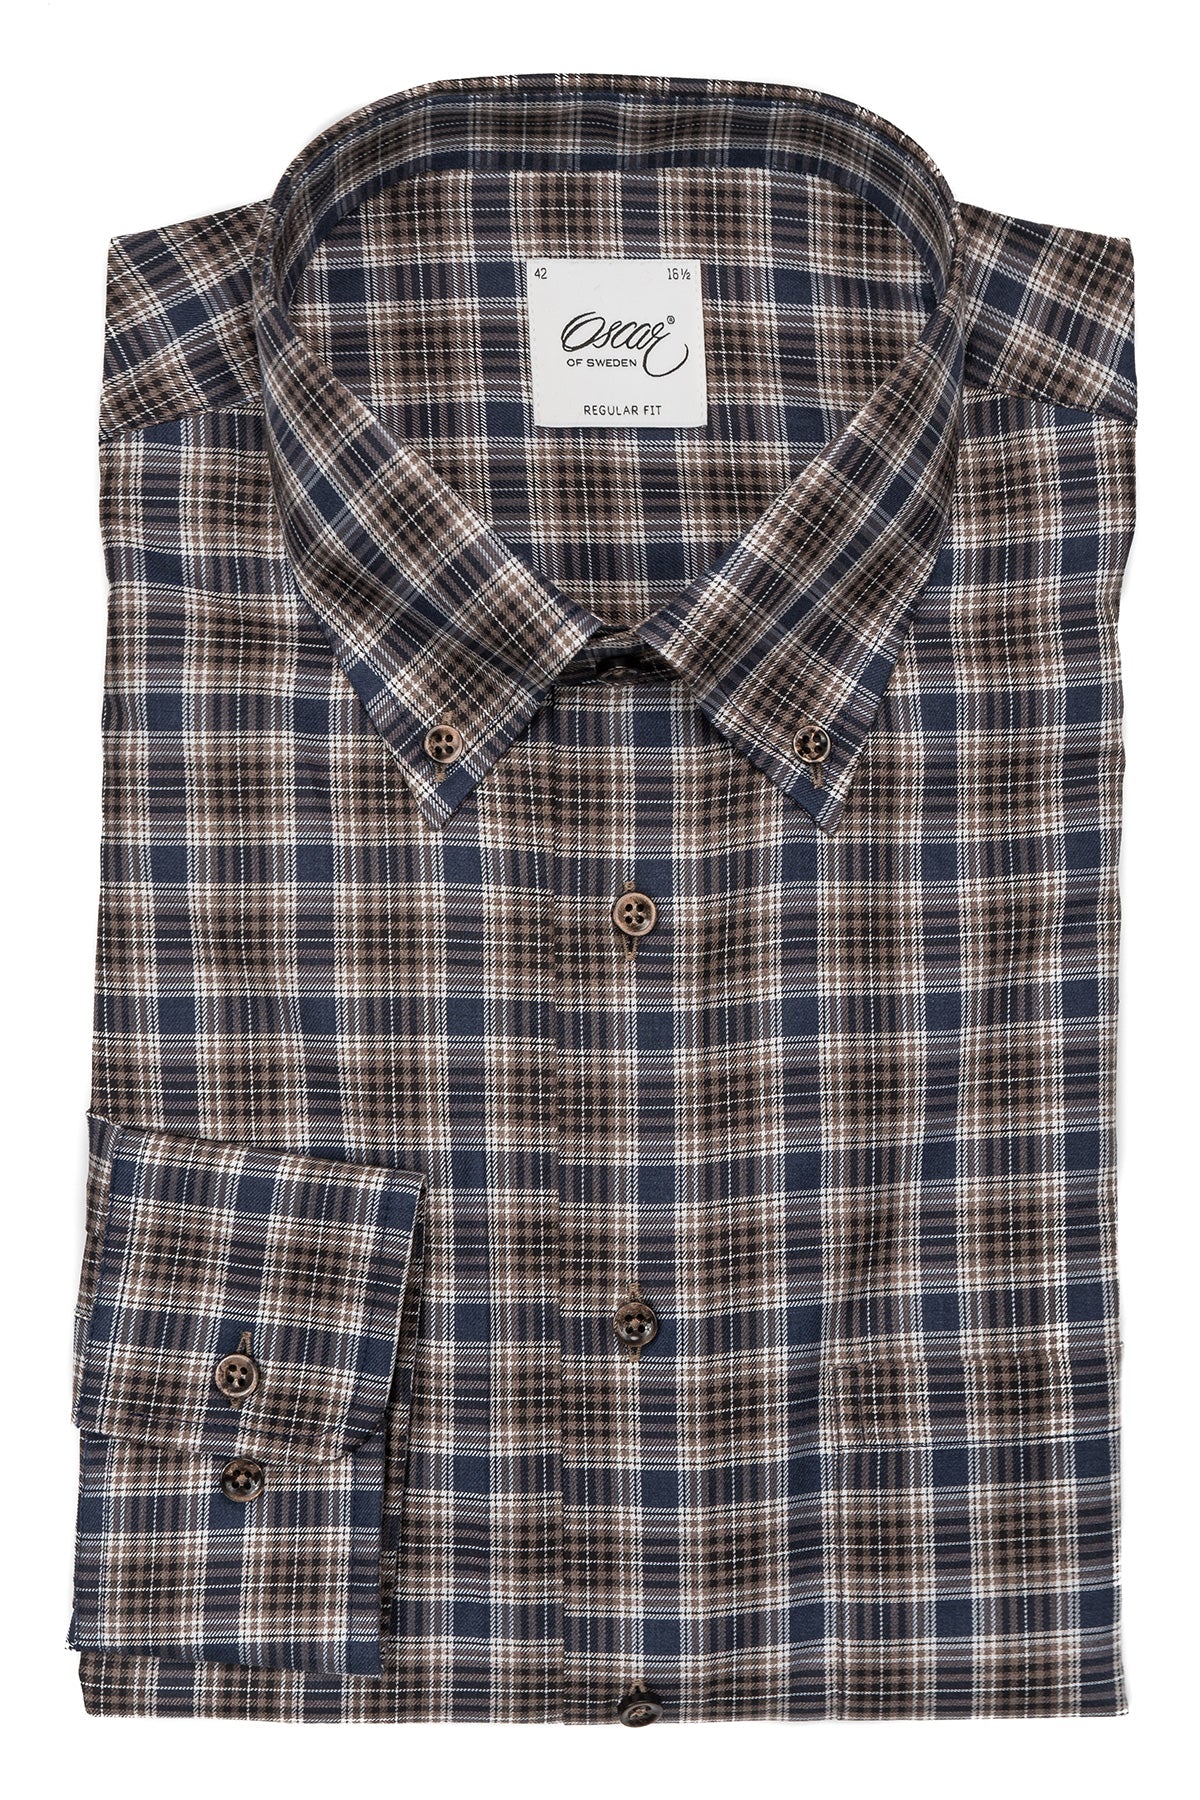 Blue and brown checked regular fit shirt